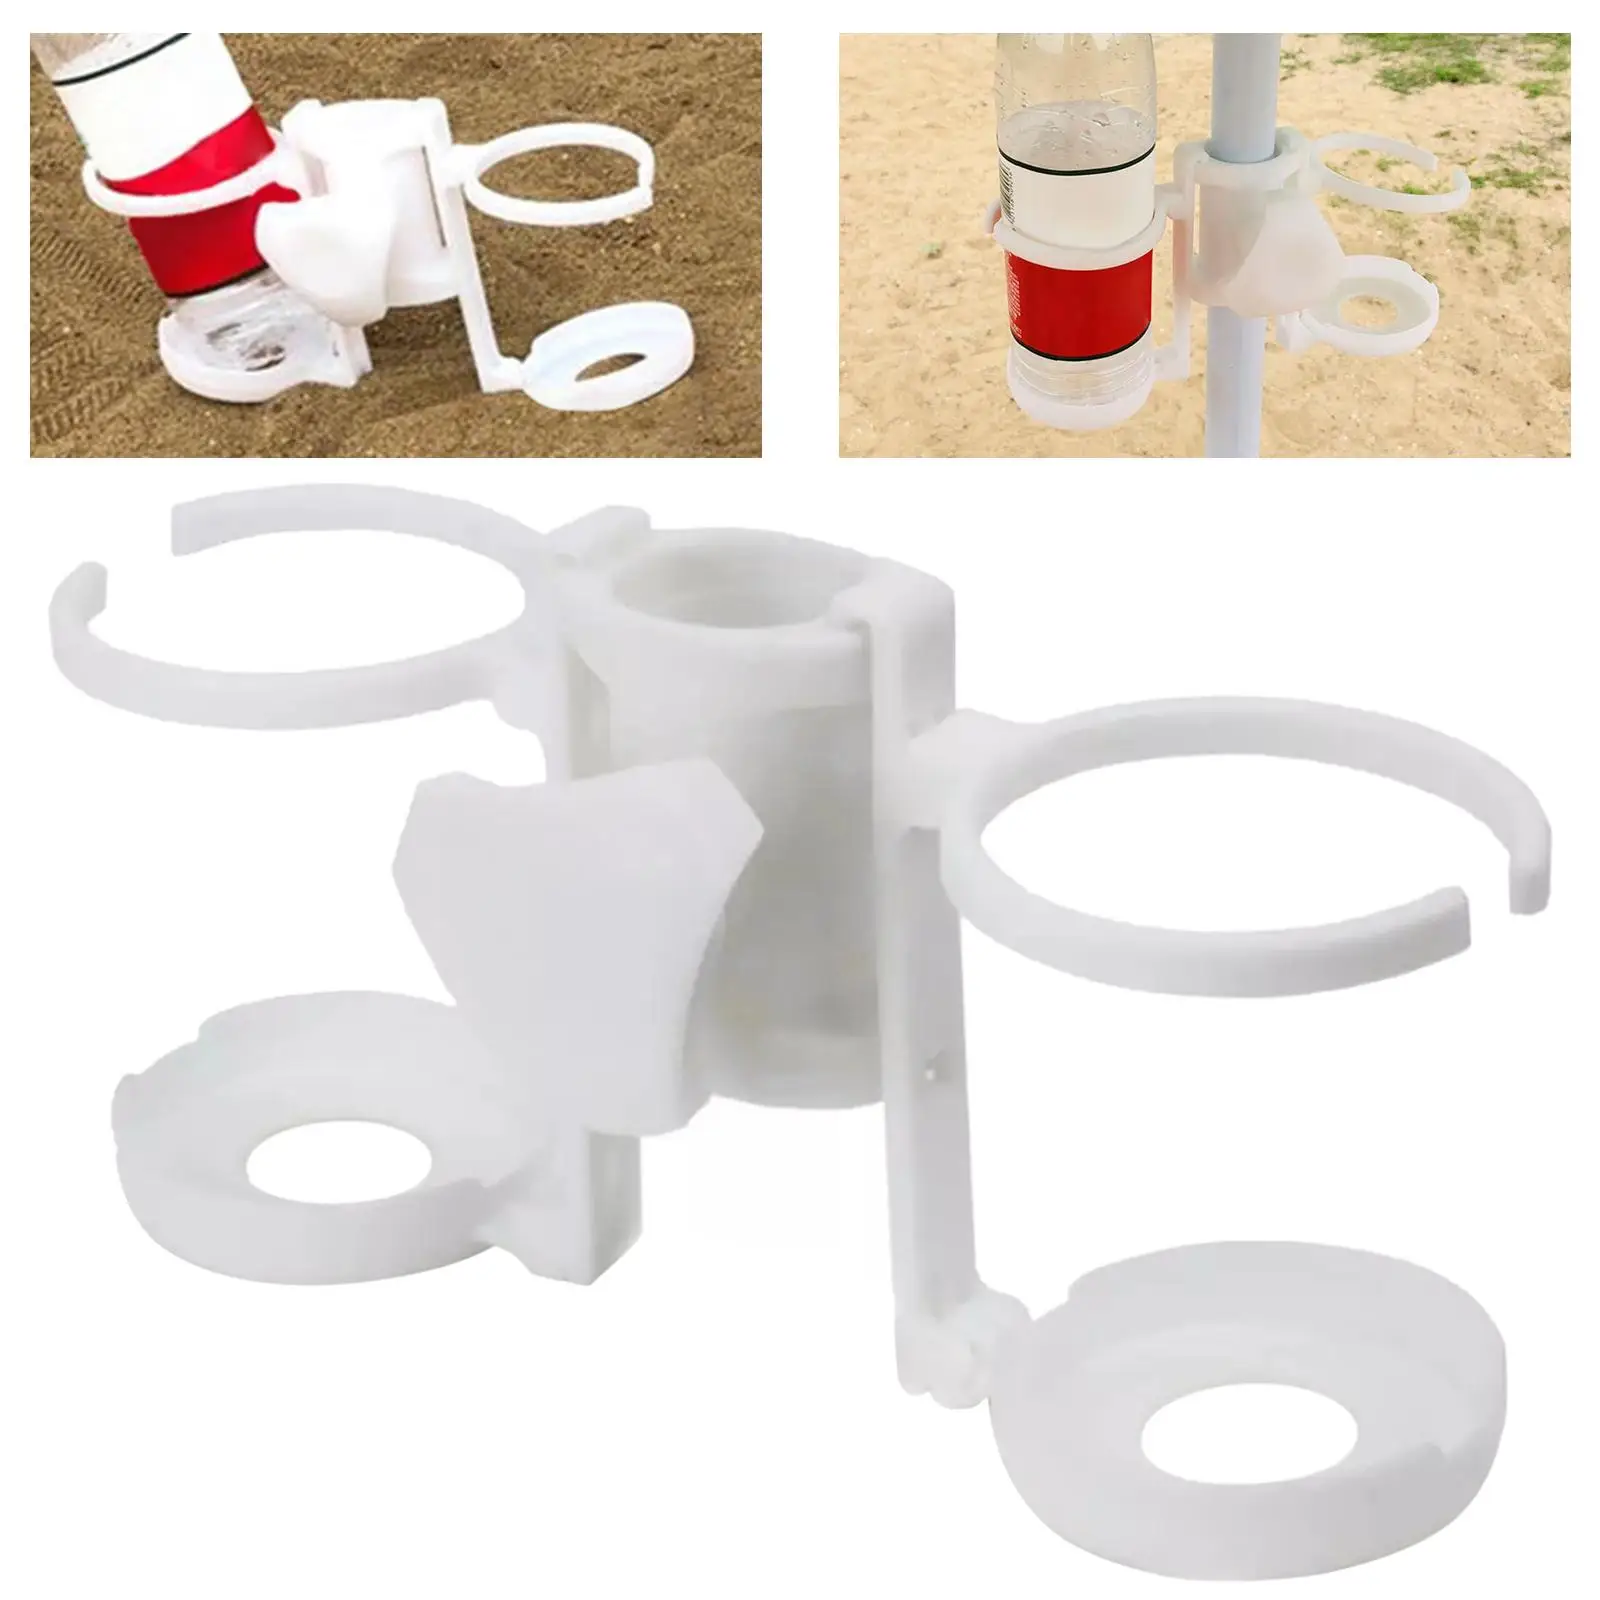 Outdoor Beach Umbrella Cup Holder Portable W/ 2 Drink Holders Drink Beach Garden Swimming Pool Coffee Stand for Umbrella Patio